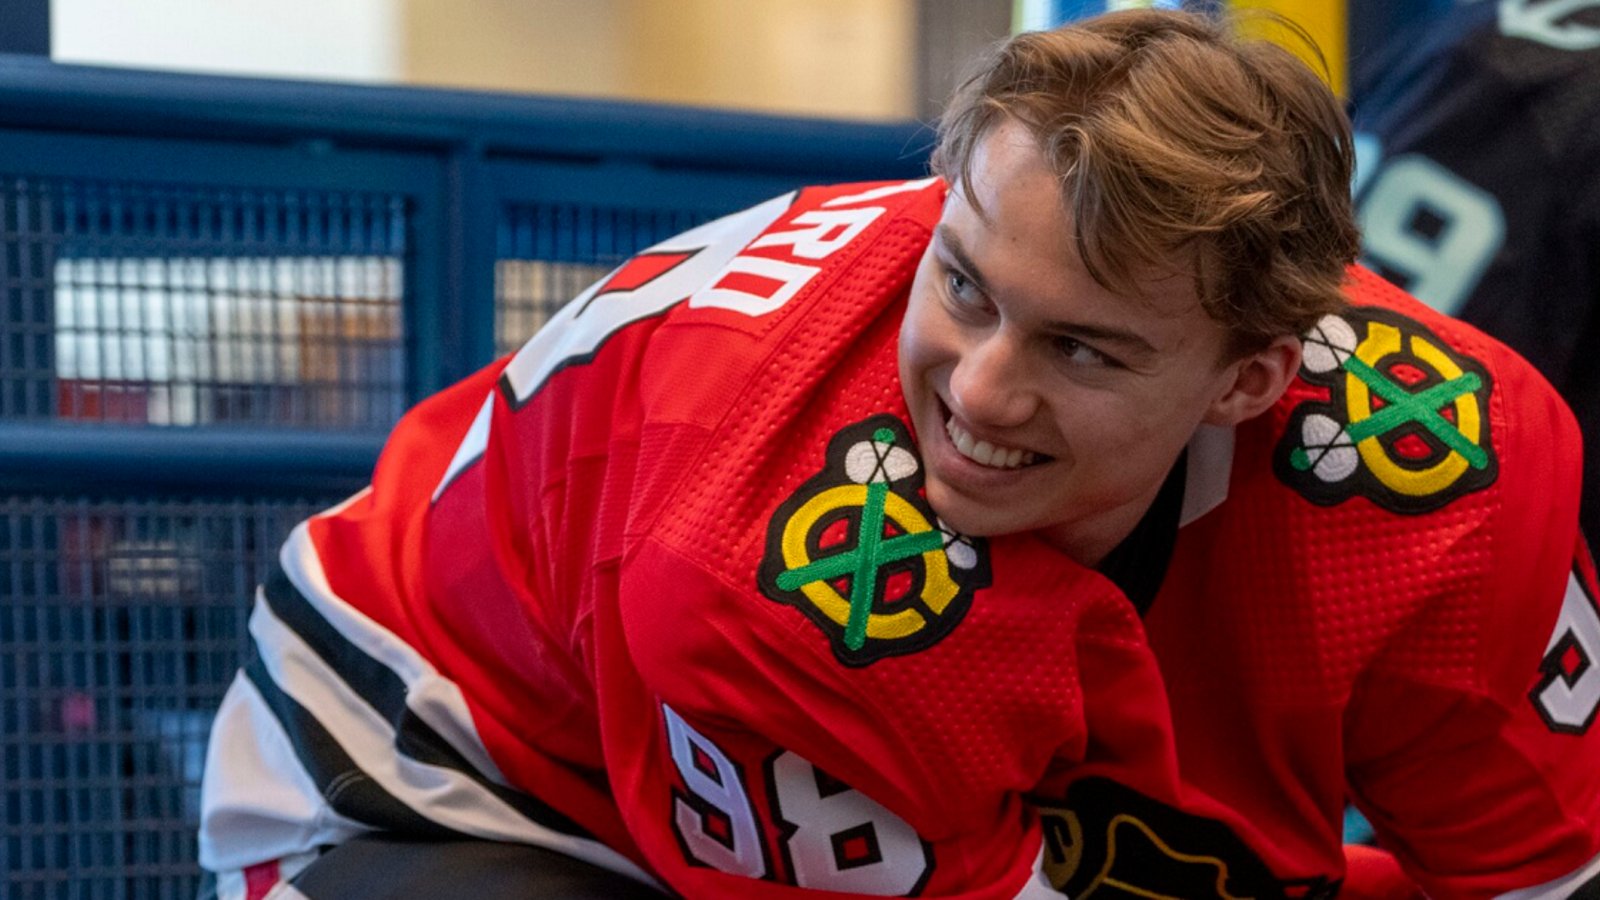 Connor Bedard scored a hat trick in his first game as a Blackhawk!